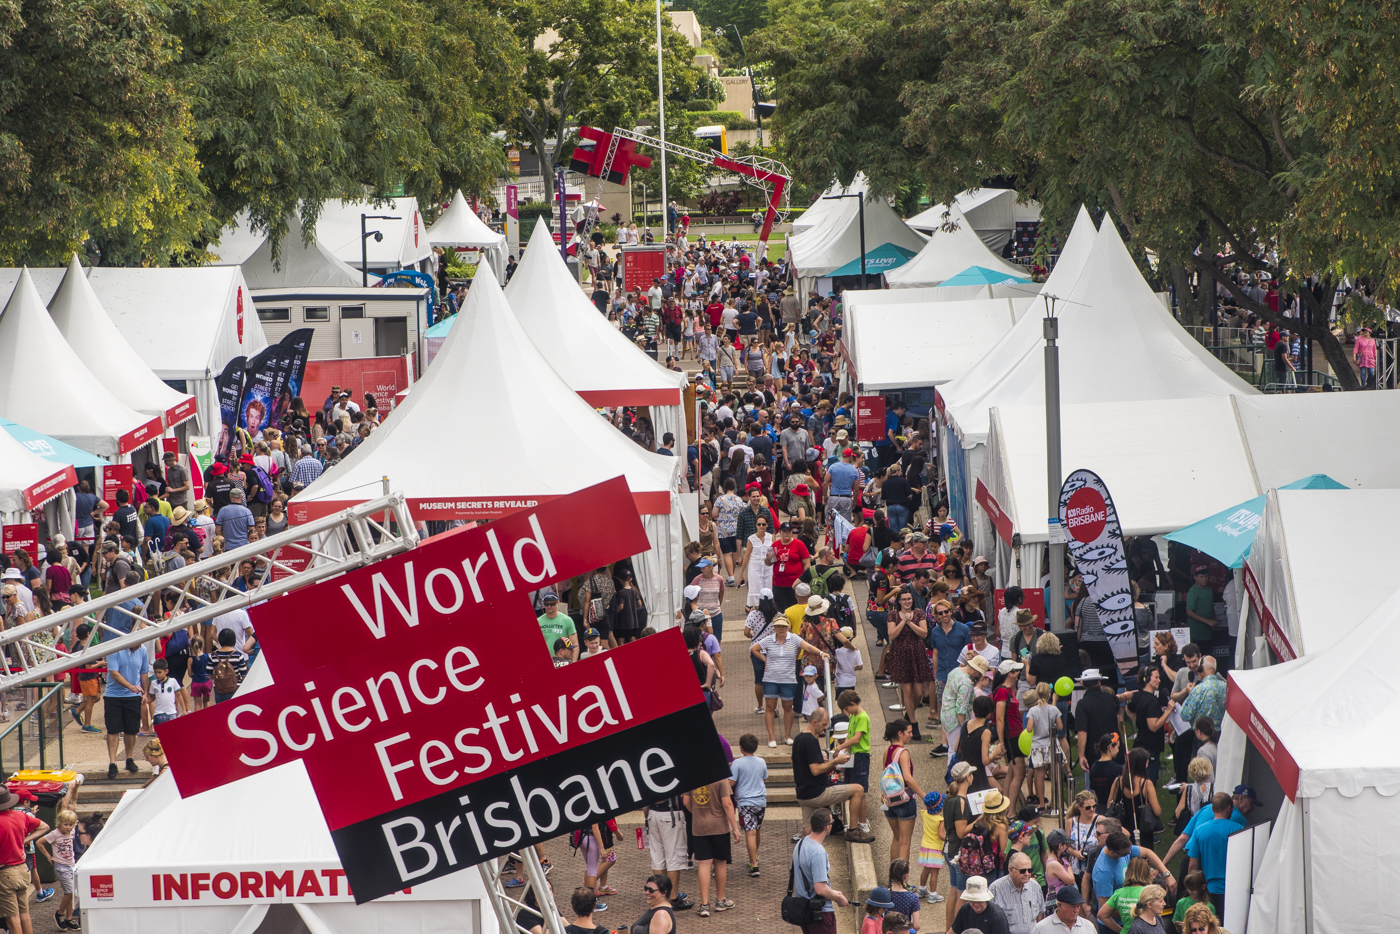 World Science Festival Brisbane to return in March The Nibbler